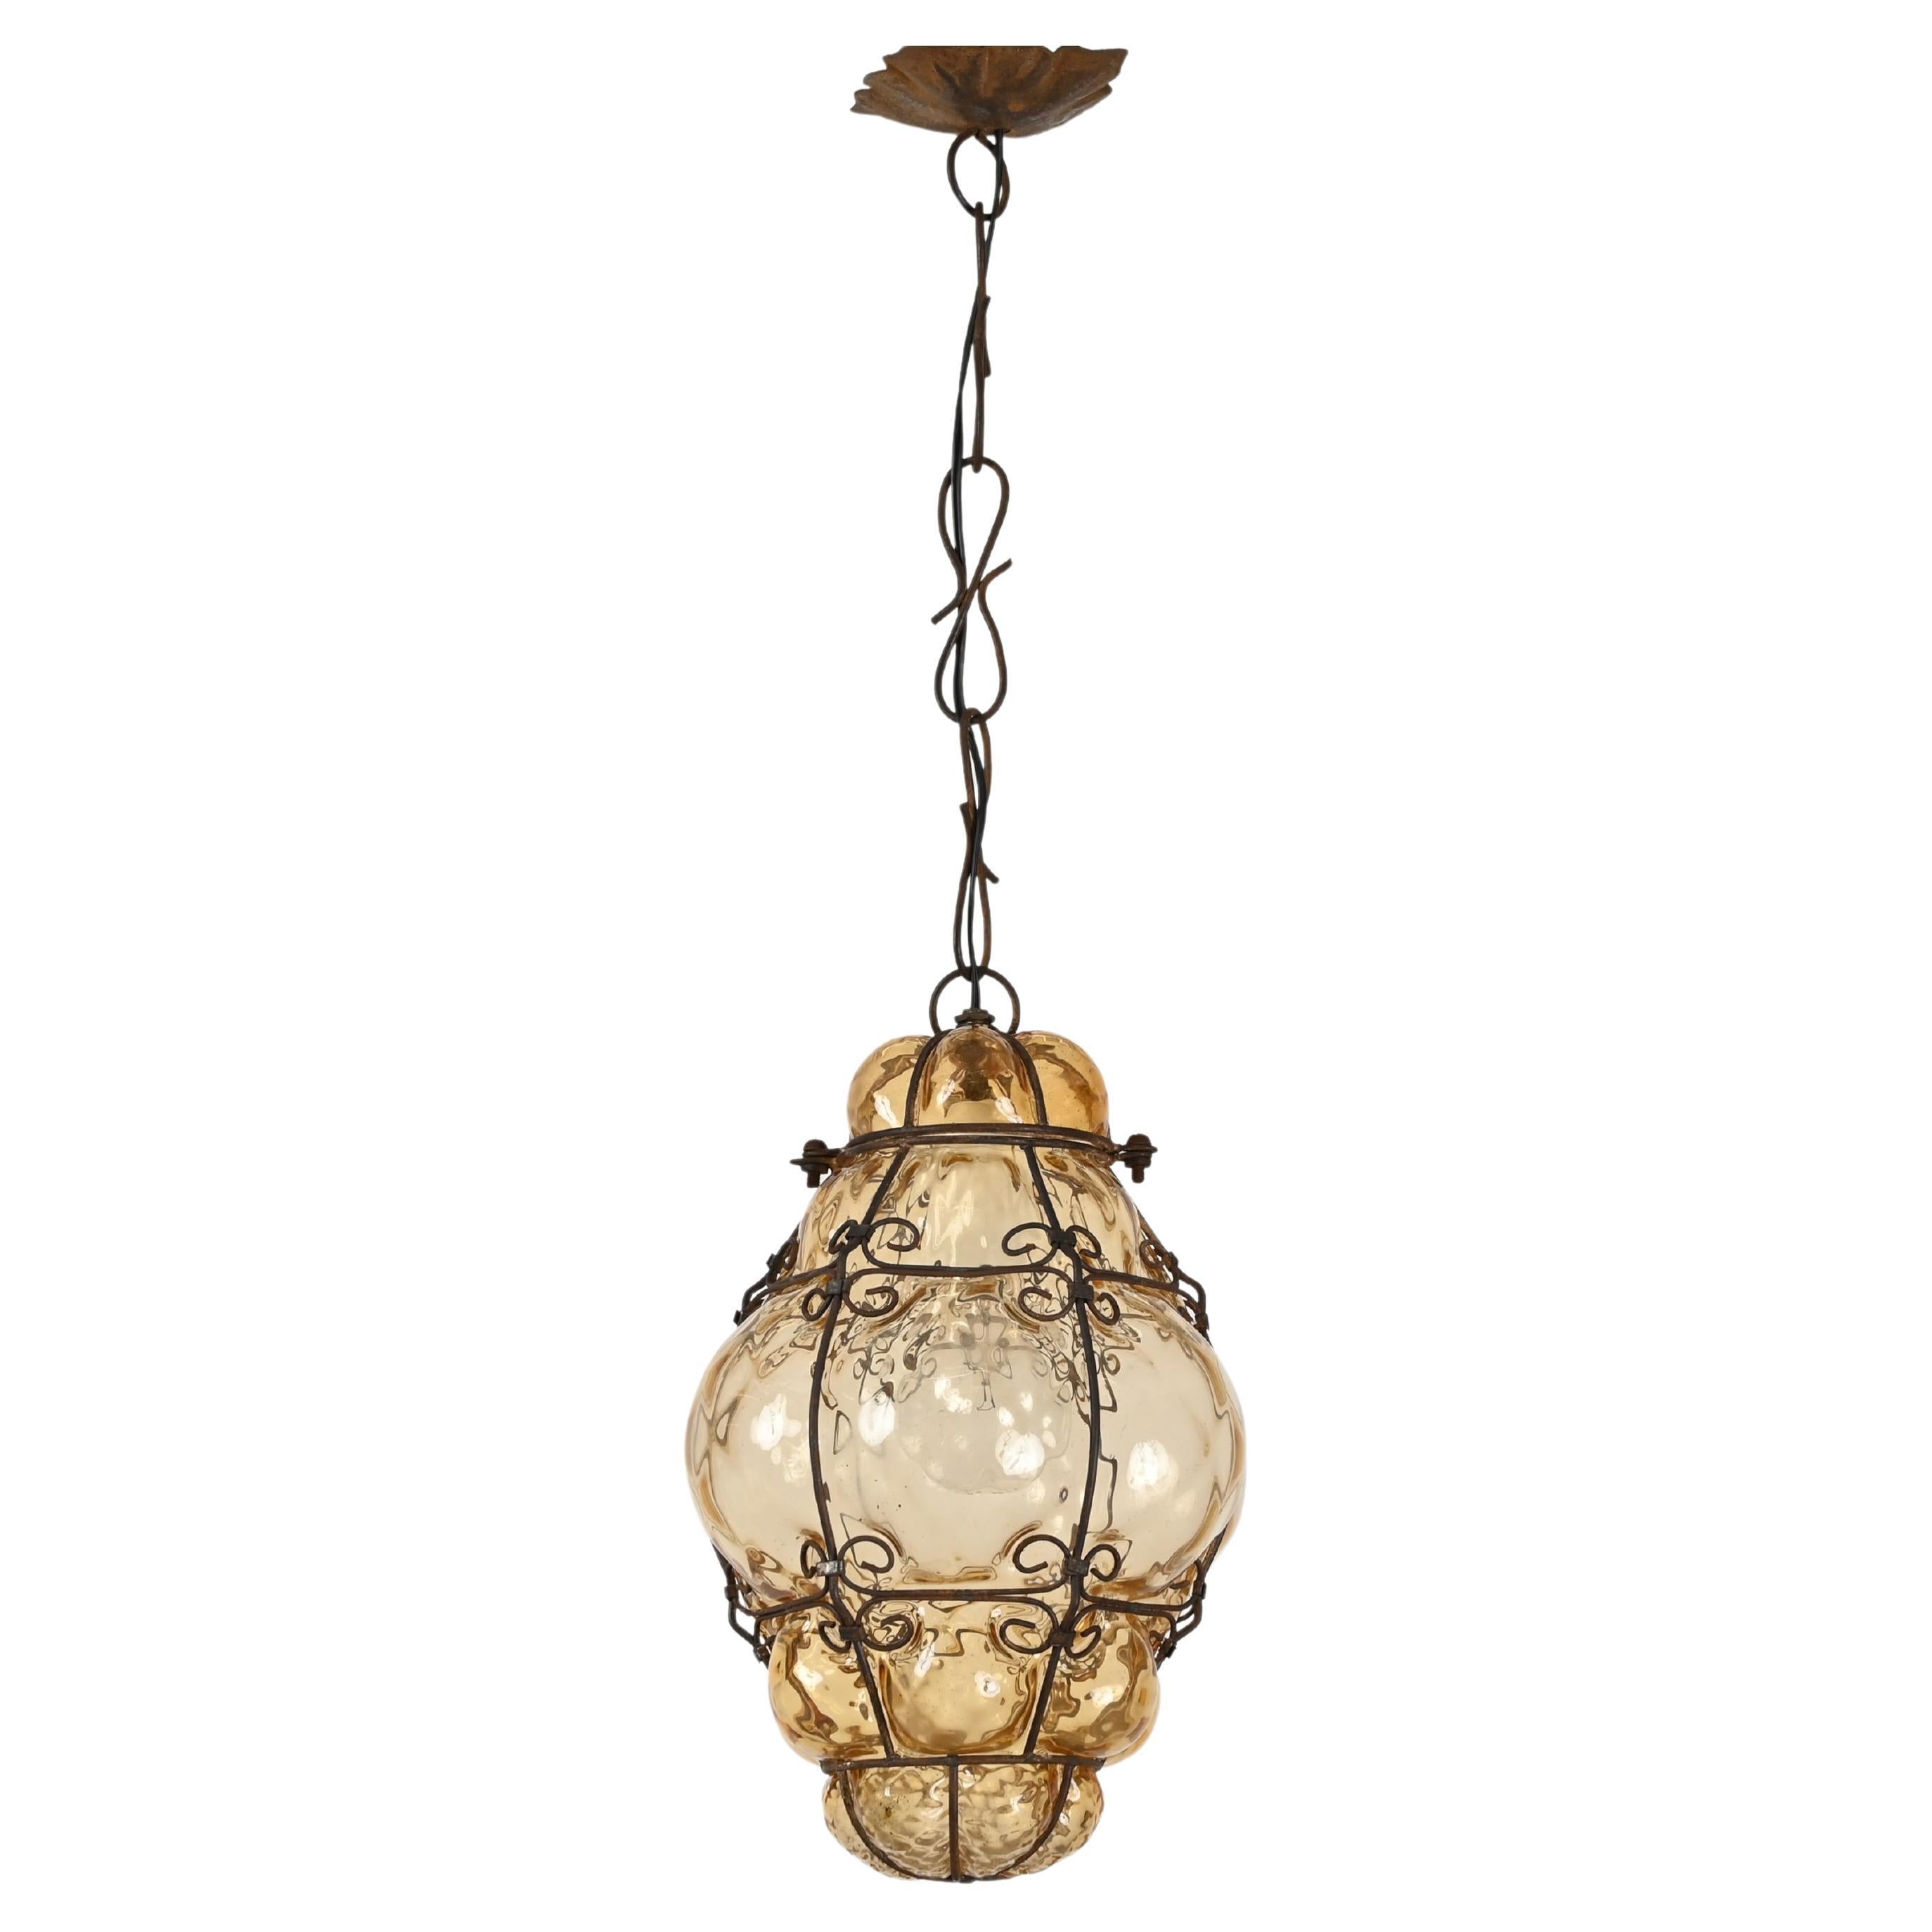 Venetian Murano Mouthblown Amber Glass Chandelier with Iron Frame, Italy 1940s For Sale